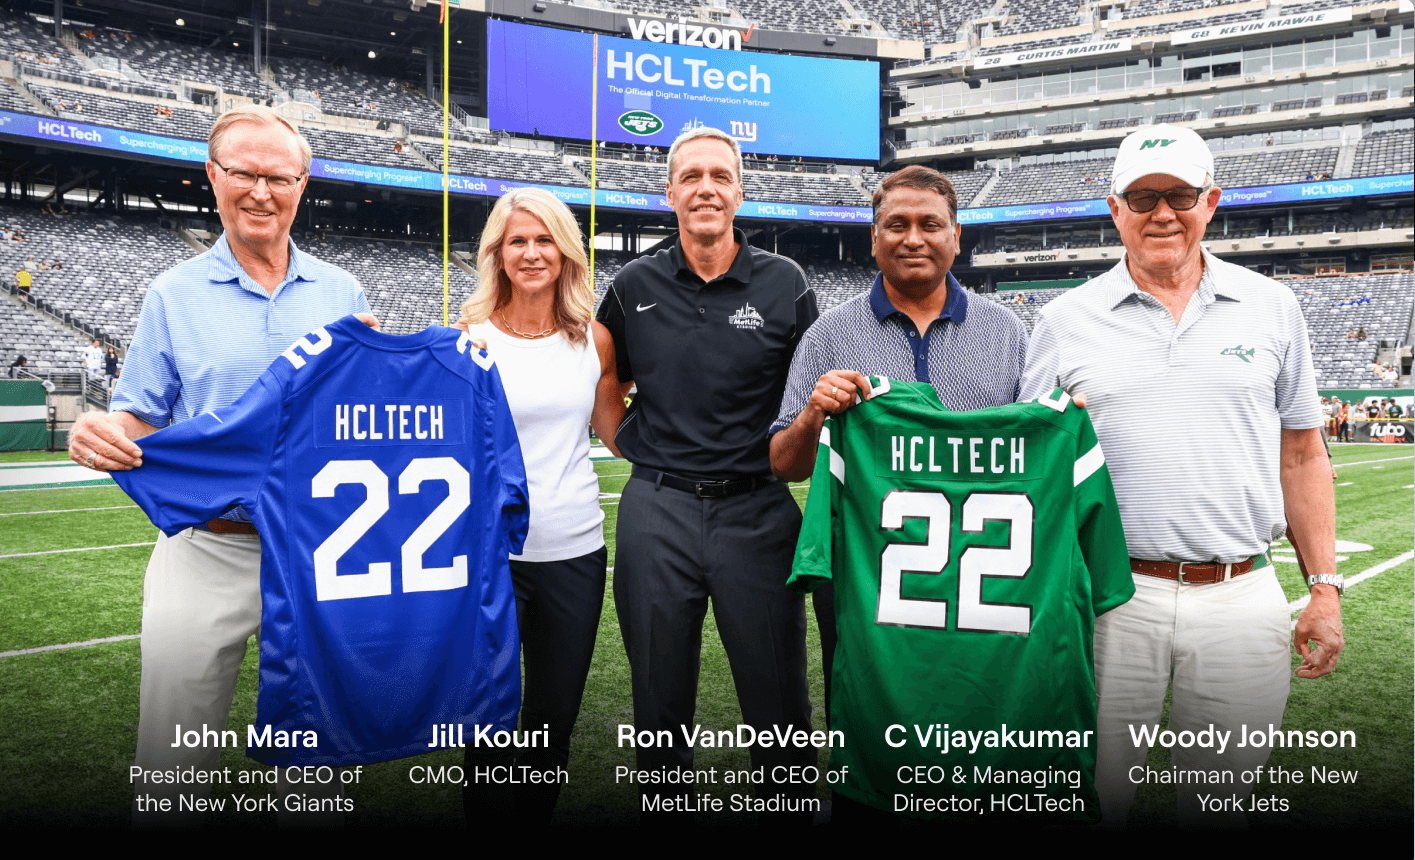 Our partnership with MetLife Stadium